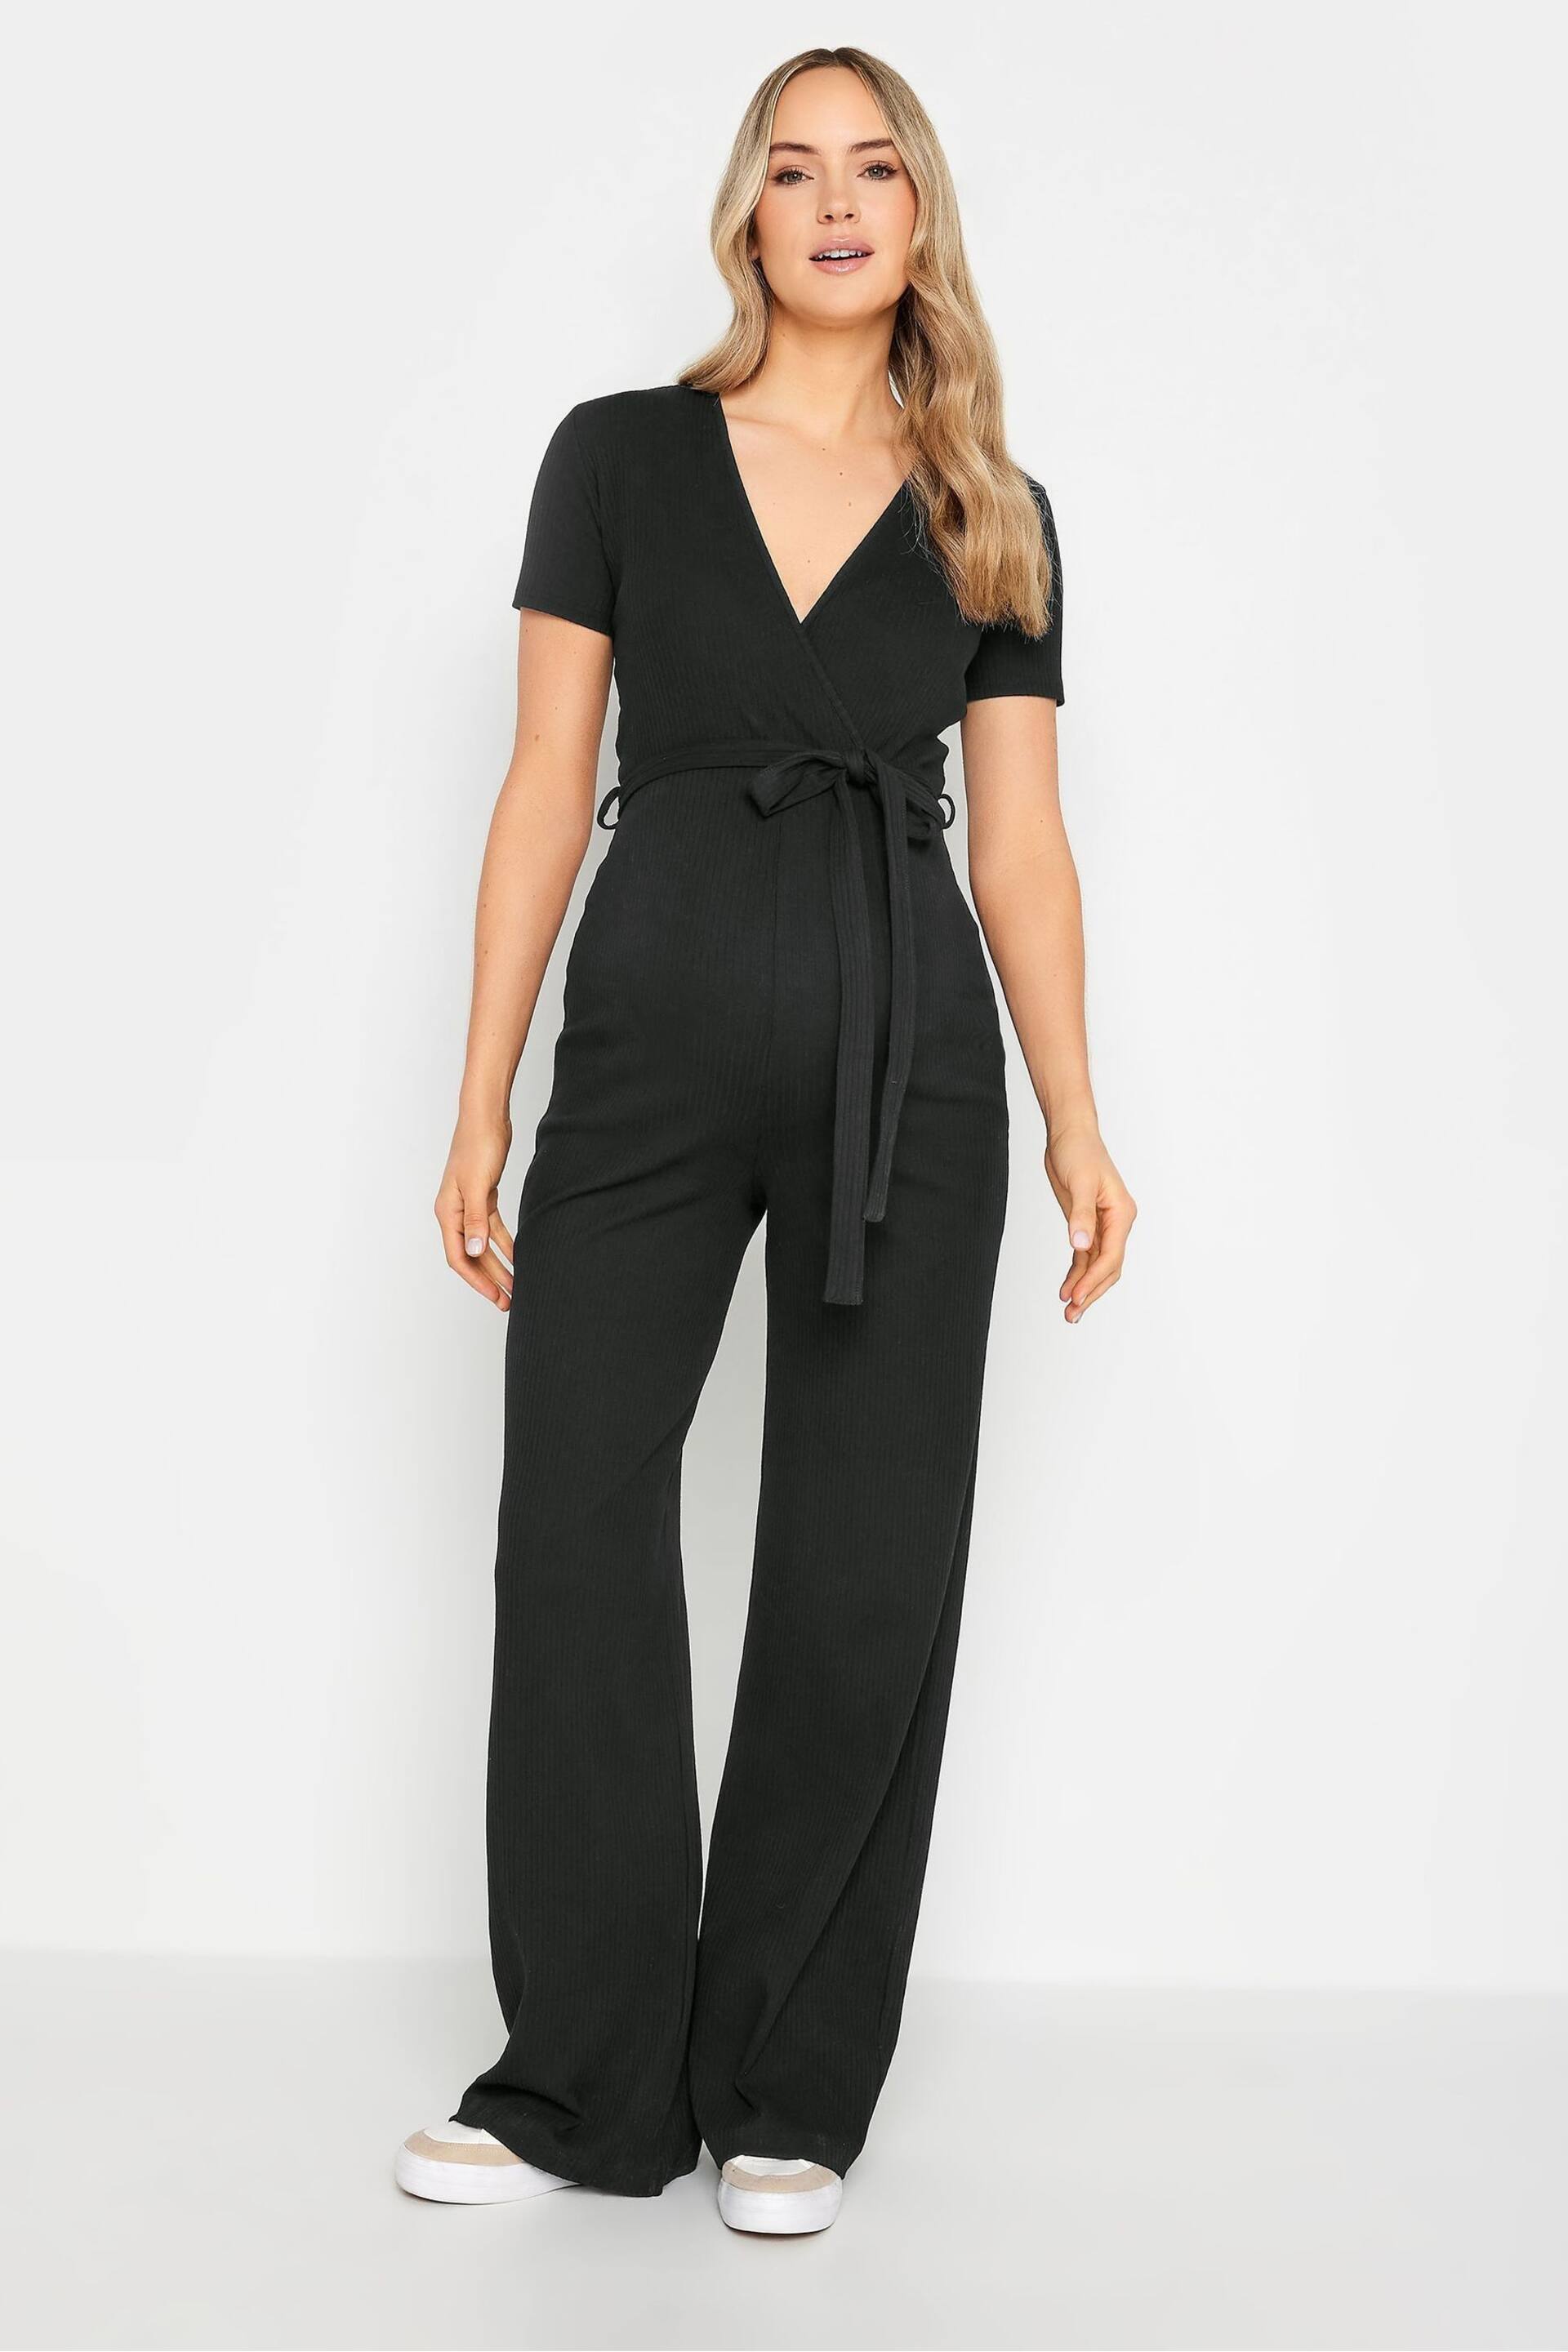 Long Tall Sally Black Maternity Ribbed Jumpsuit - Image 1 of 5